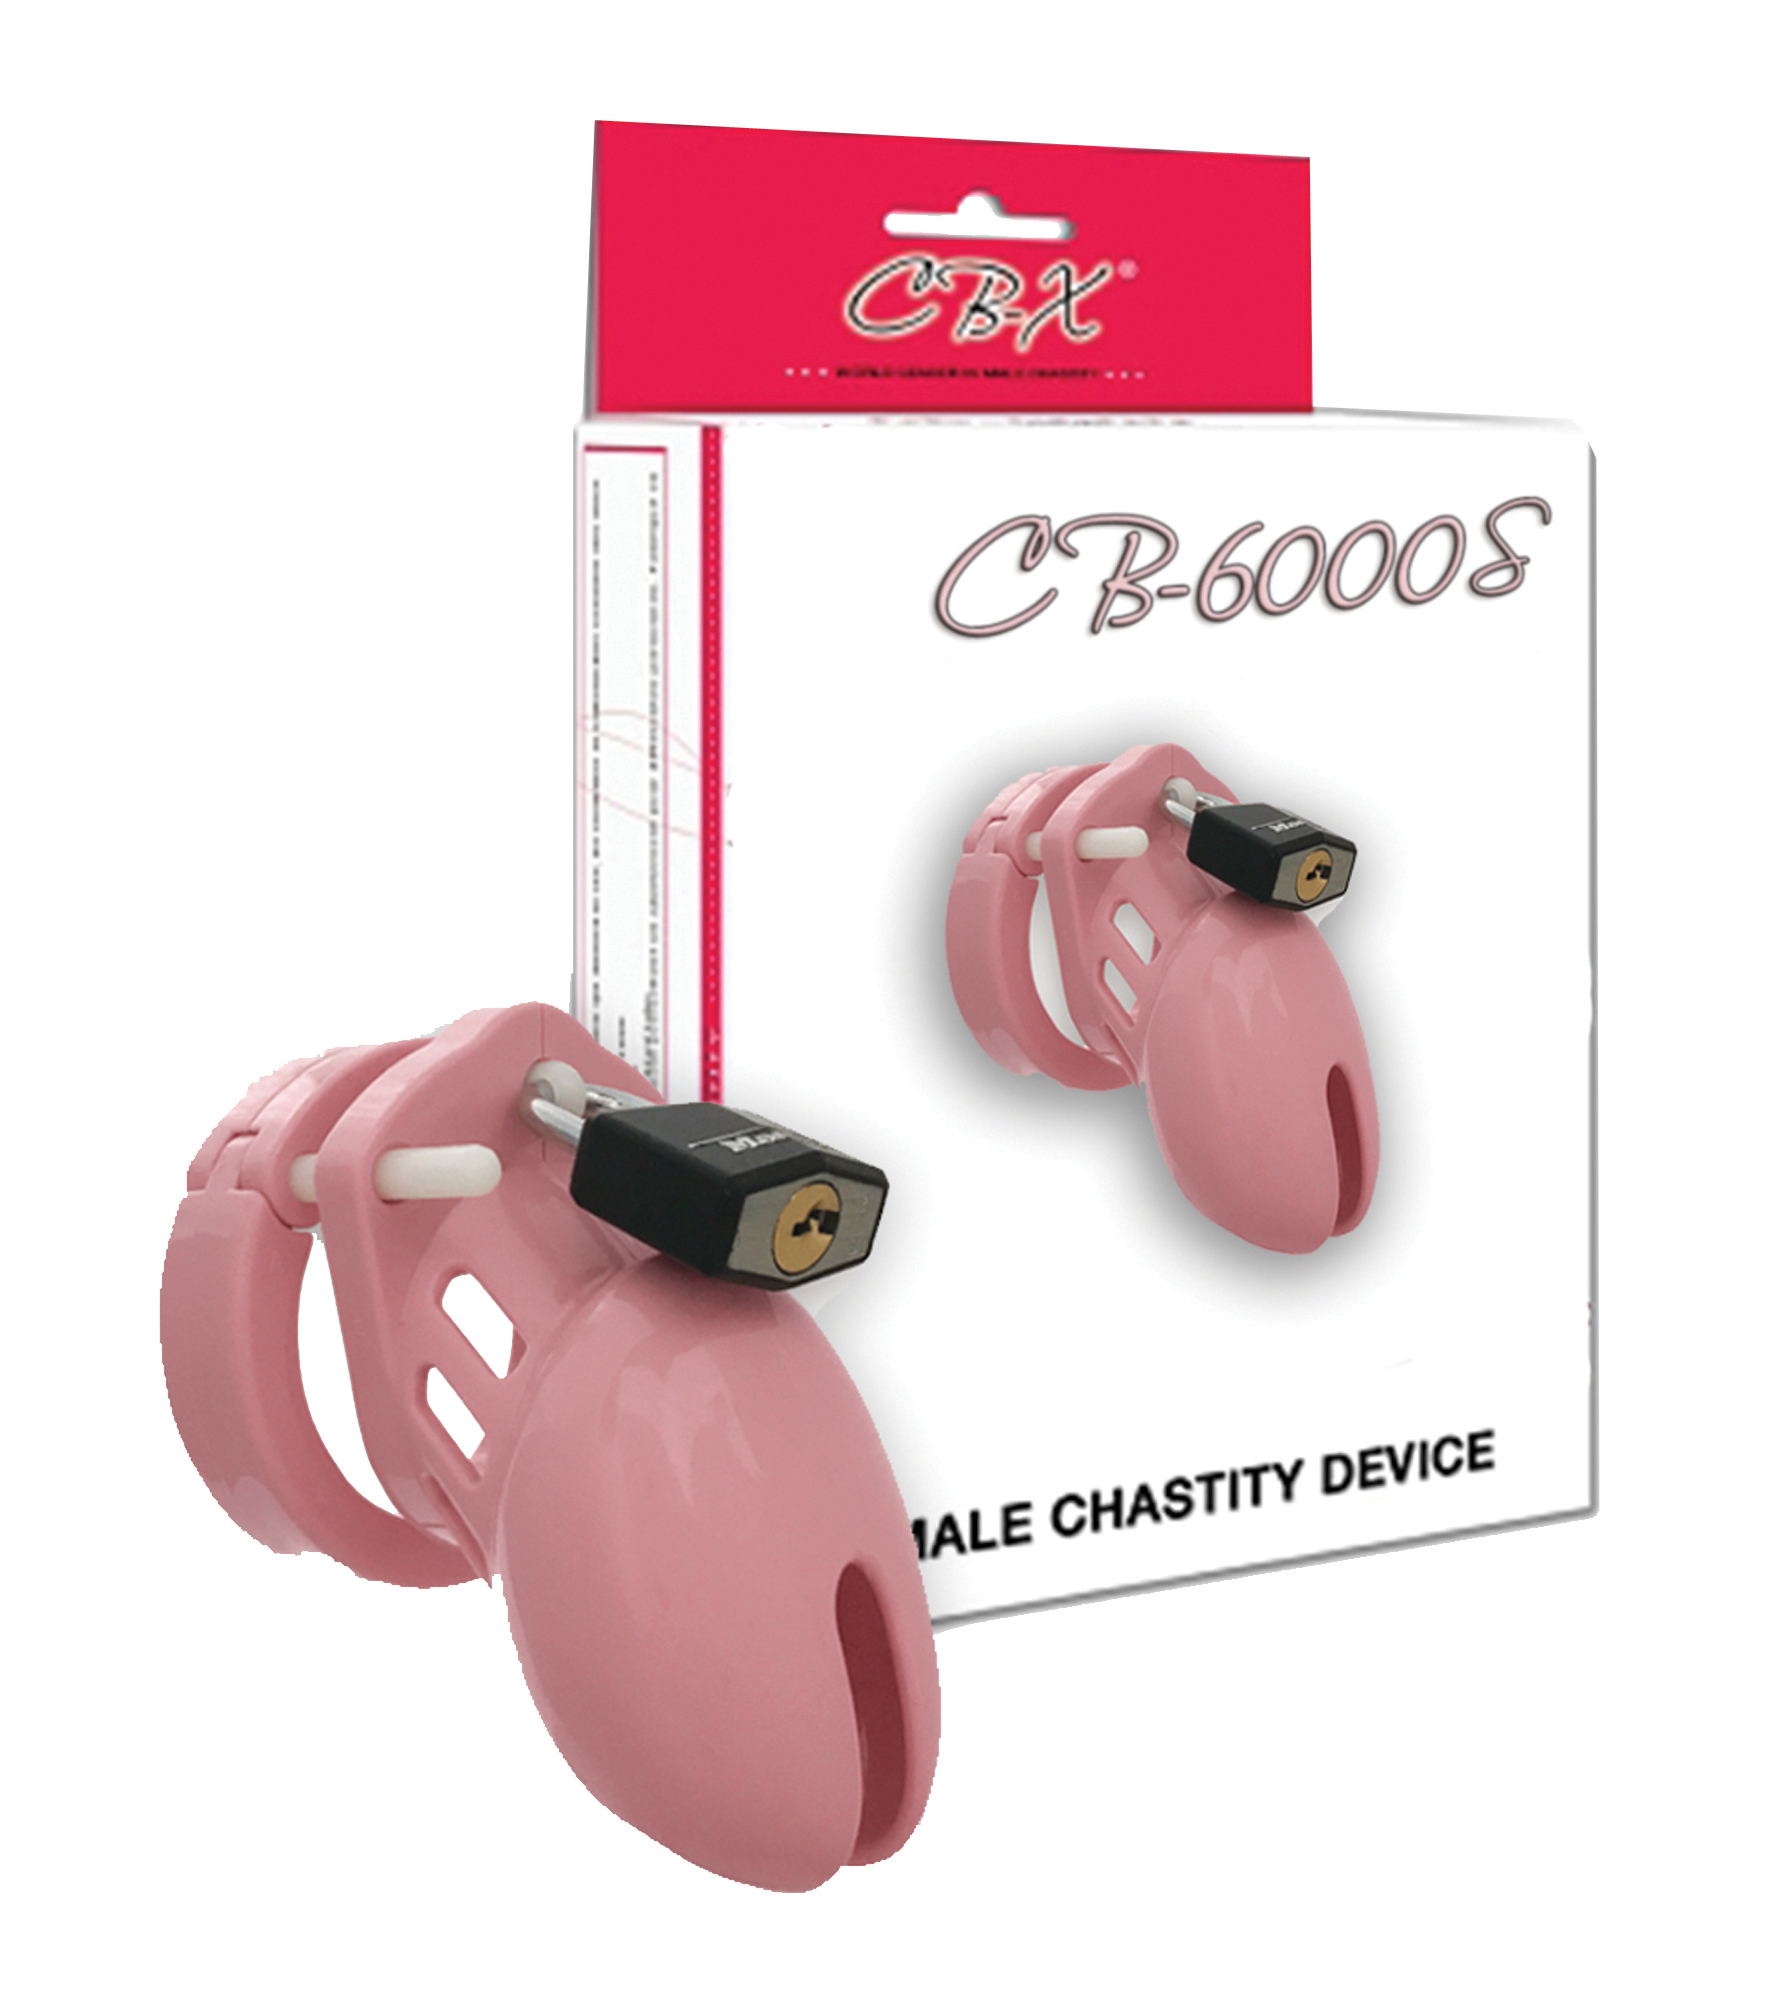 Male Chastity CB-6000S pink